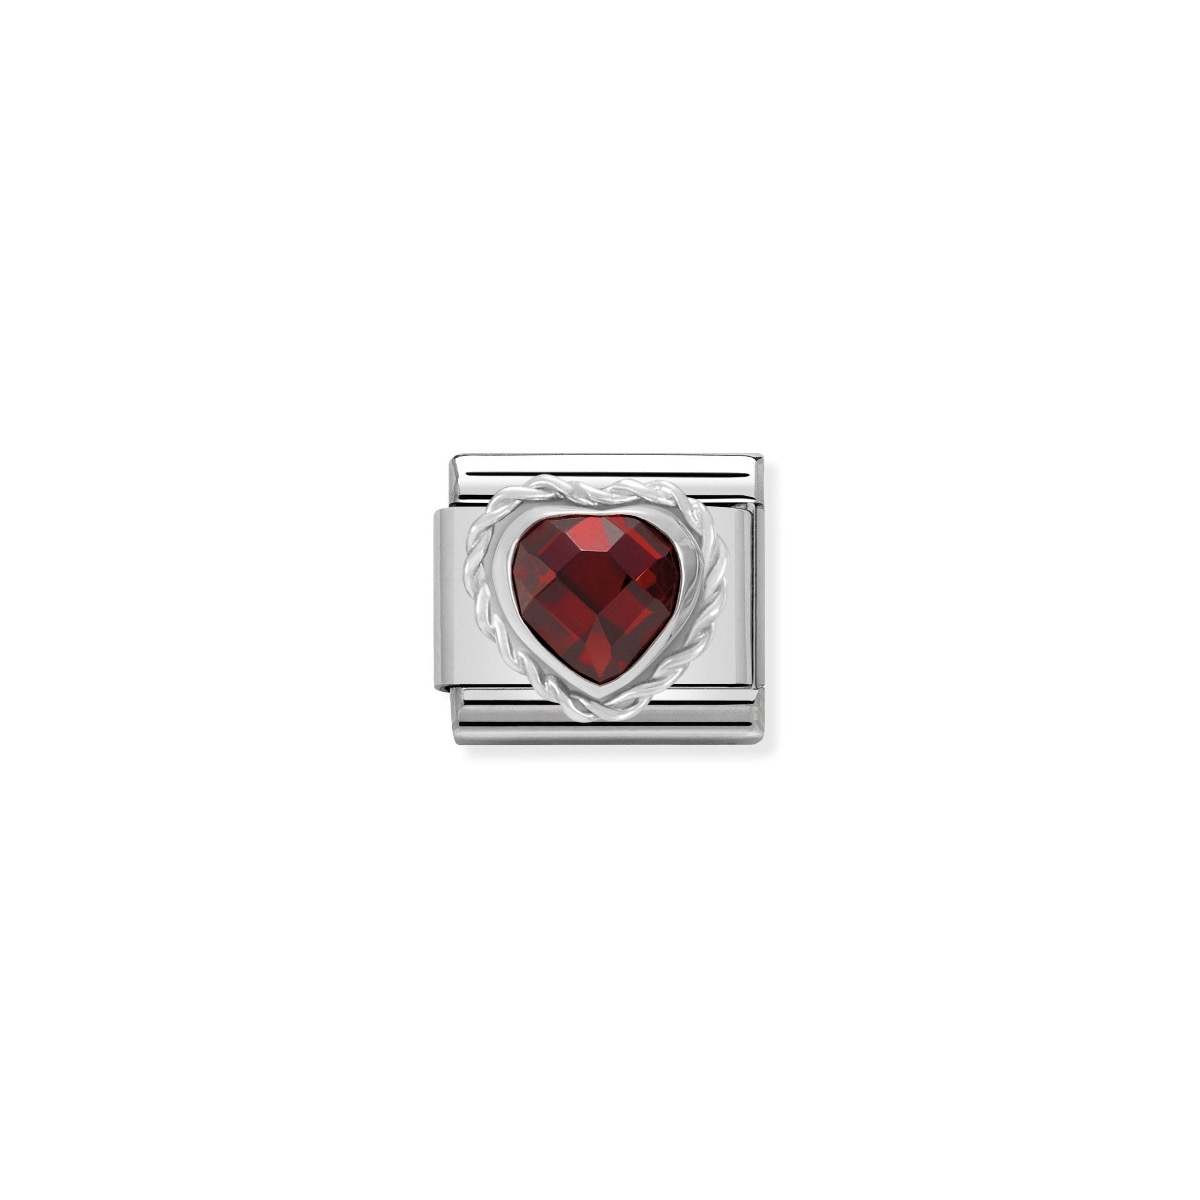 Nomination Silver and Zirconia Faceted Heart Charm - Red - 330603/005